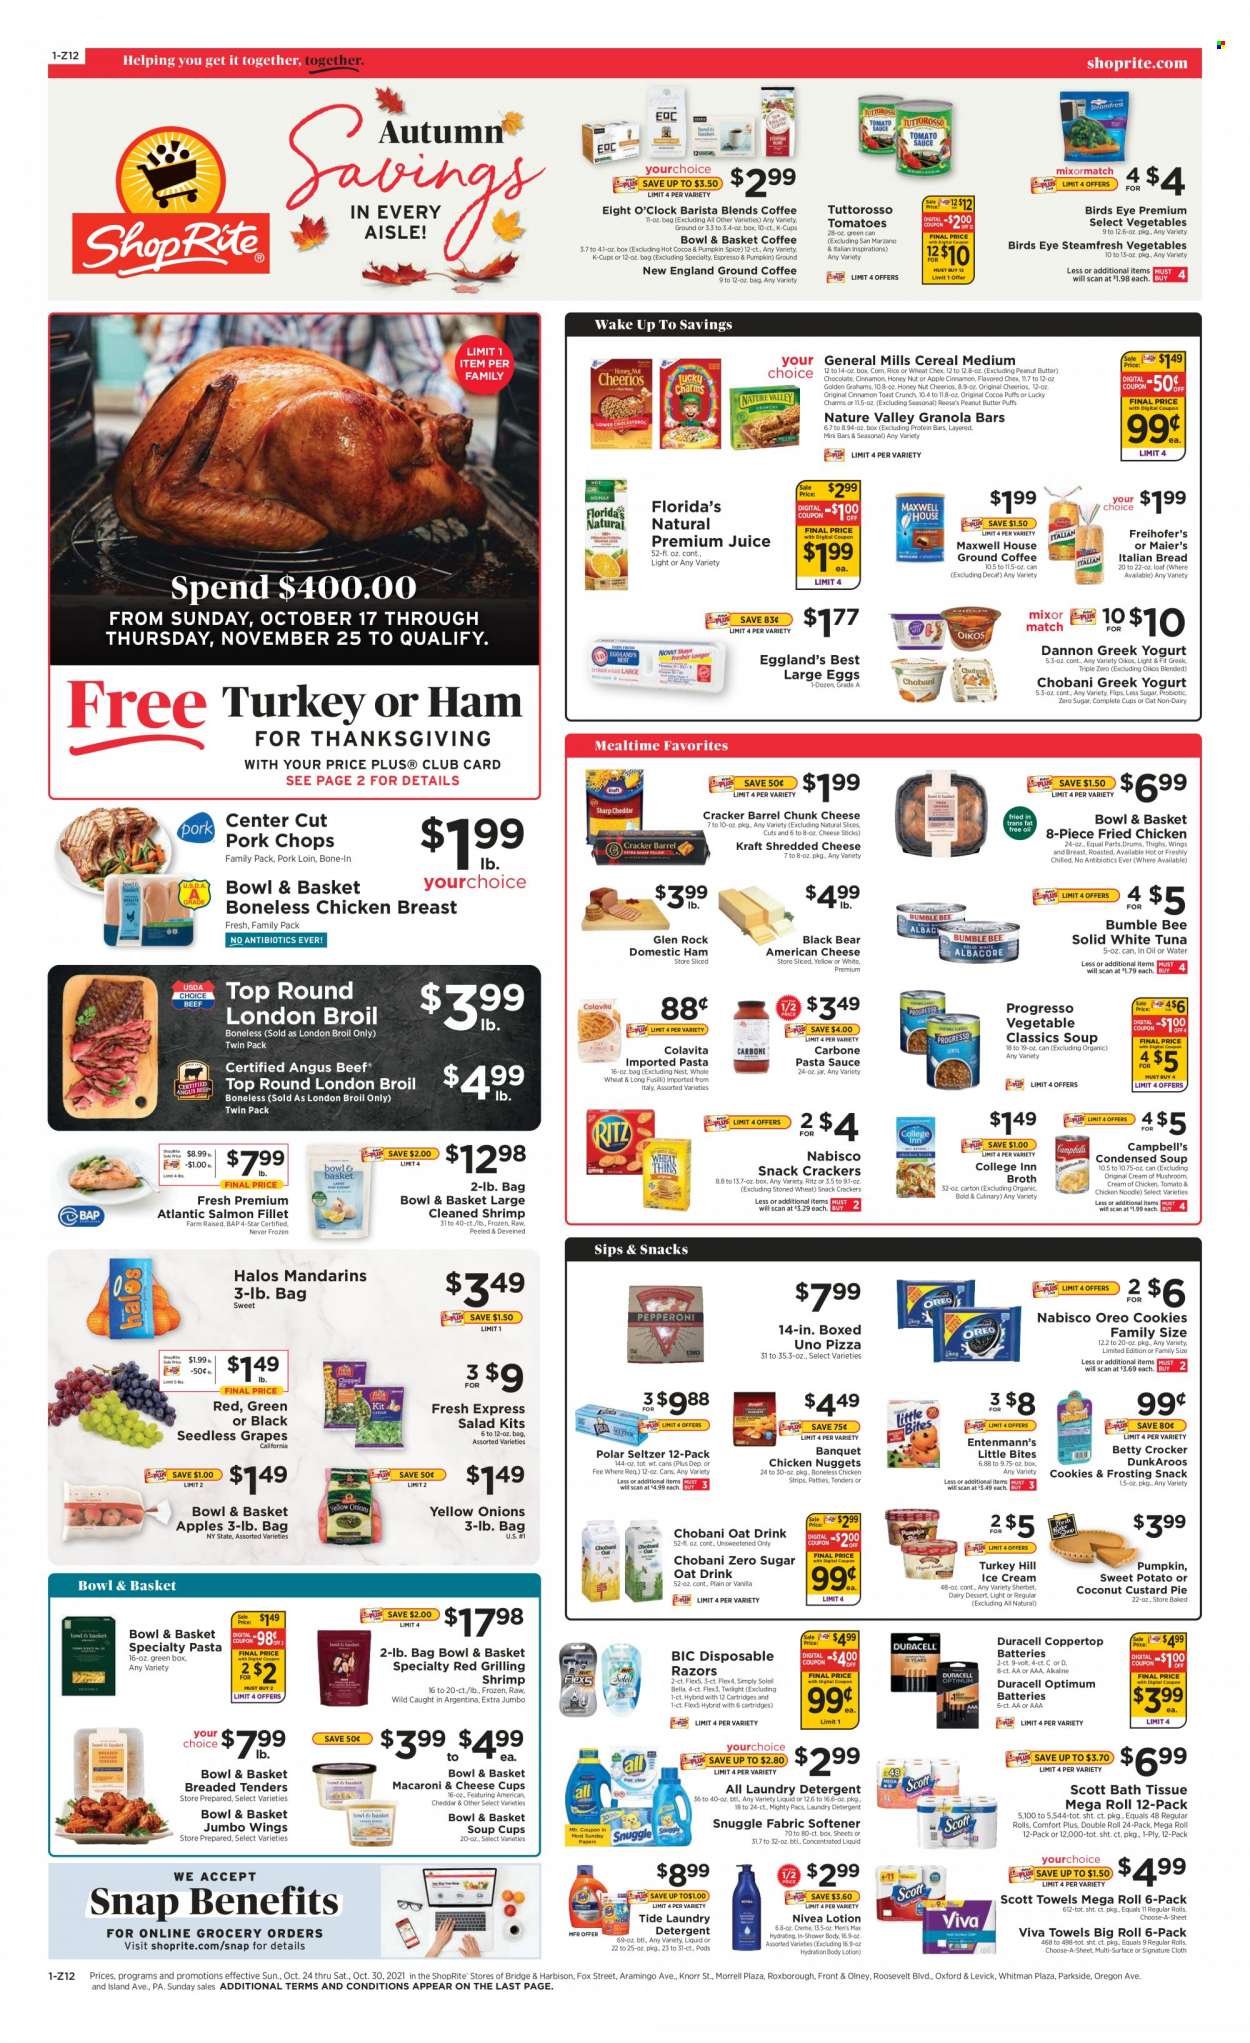 thumbnail - ShopRite Flyer - 10/24/2021 - 10/30/2021 - Sales products - seedless grapes, bread, pie, Bowl & Basket, Entenmann's, corn, sweet potato, salad, grapes, mandarines, salmon, salmon fillet, tuna, shrimps, Campbell's, pizza, pasta sauce, condensed soup, soup, nuggets, Bumble Bee, Knorr, sauce, fried chicken, chicken nuggets, Bird's Eye, noodles, instant soup, Progresso, Kraft®, american cheese, shredded cheese, cheese cup, chunk cheese, greek yoghurt, Oreo, Oikos, Chobani, Dannon, large eggs, ice cream, sherbet, Reese's, strips, chicken strips, cheese sticks, cookies, snack, crackers, Little Bites, Florida's Natural, RITZ, frosting, broth, cereals, Cheerios, protein bar, granola bar, Nature Valley, spice, cinnamon, peanut butter, juice, seltzer water, hot cocoa, Maxwell House, coffee capsules, K-Cups, Eight O'Clock, beef meat, pork chops, pork loin, pork meat, Nivea, bath tissue, Scott, detergent, Snuggle, Tide, fabric softener, laundry detergent, body lotion, BIC, disposable razor, Soleil Bella, battery, Duracell, Optimum. Page 1.